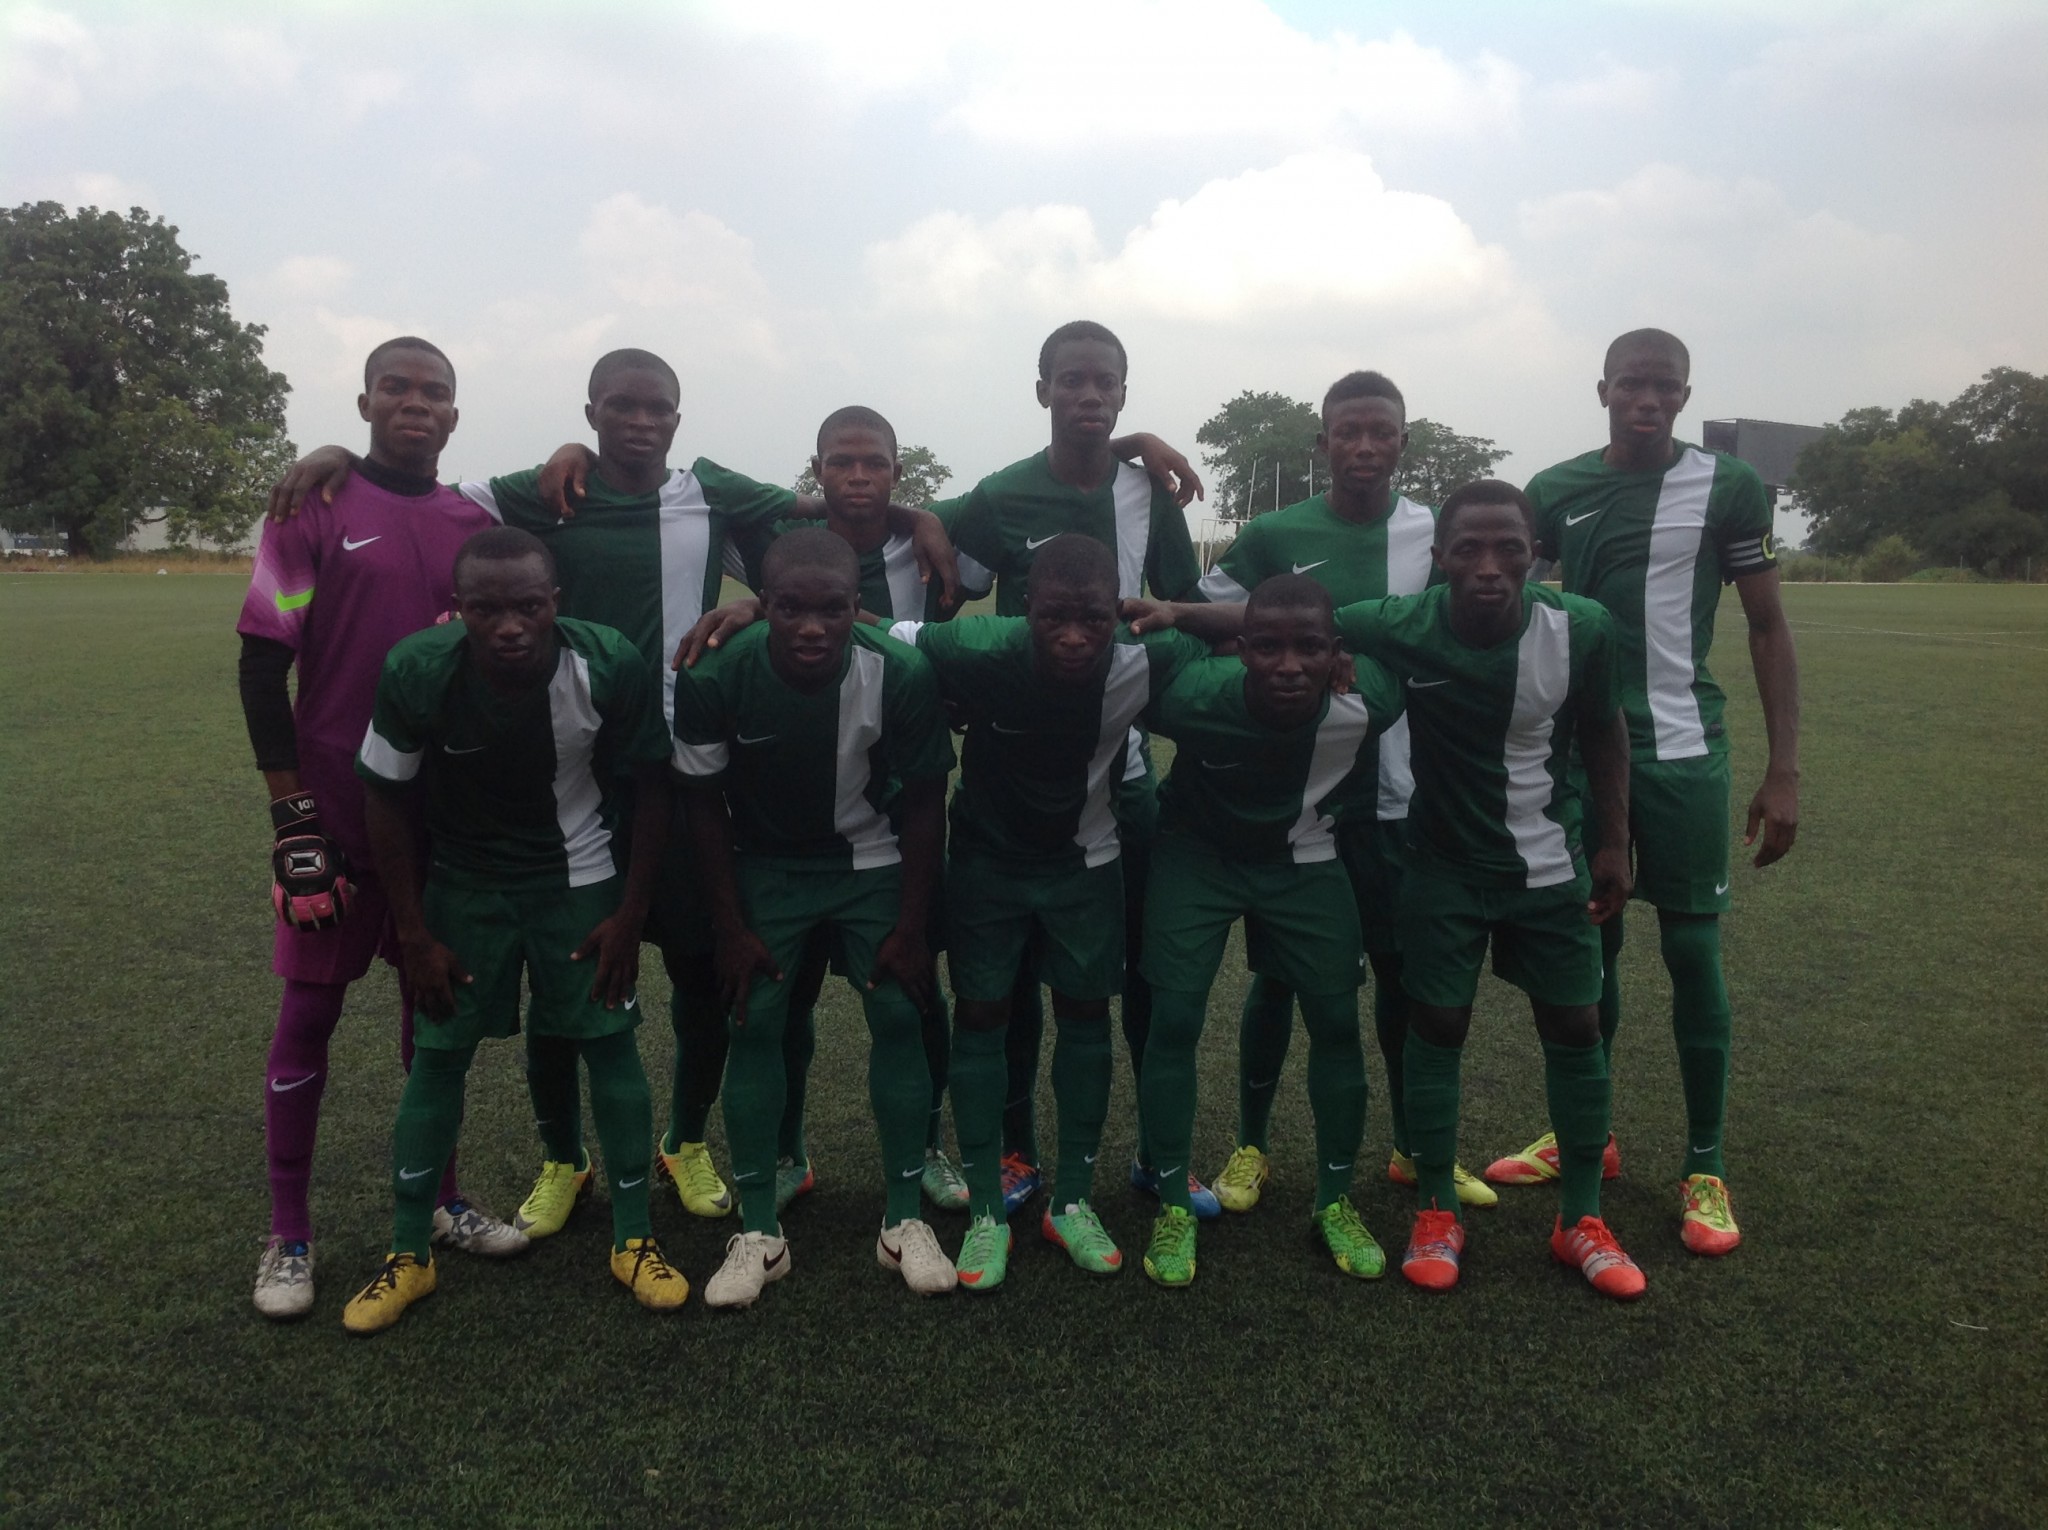 UK Mission pledges support for Nigeria football